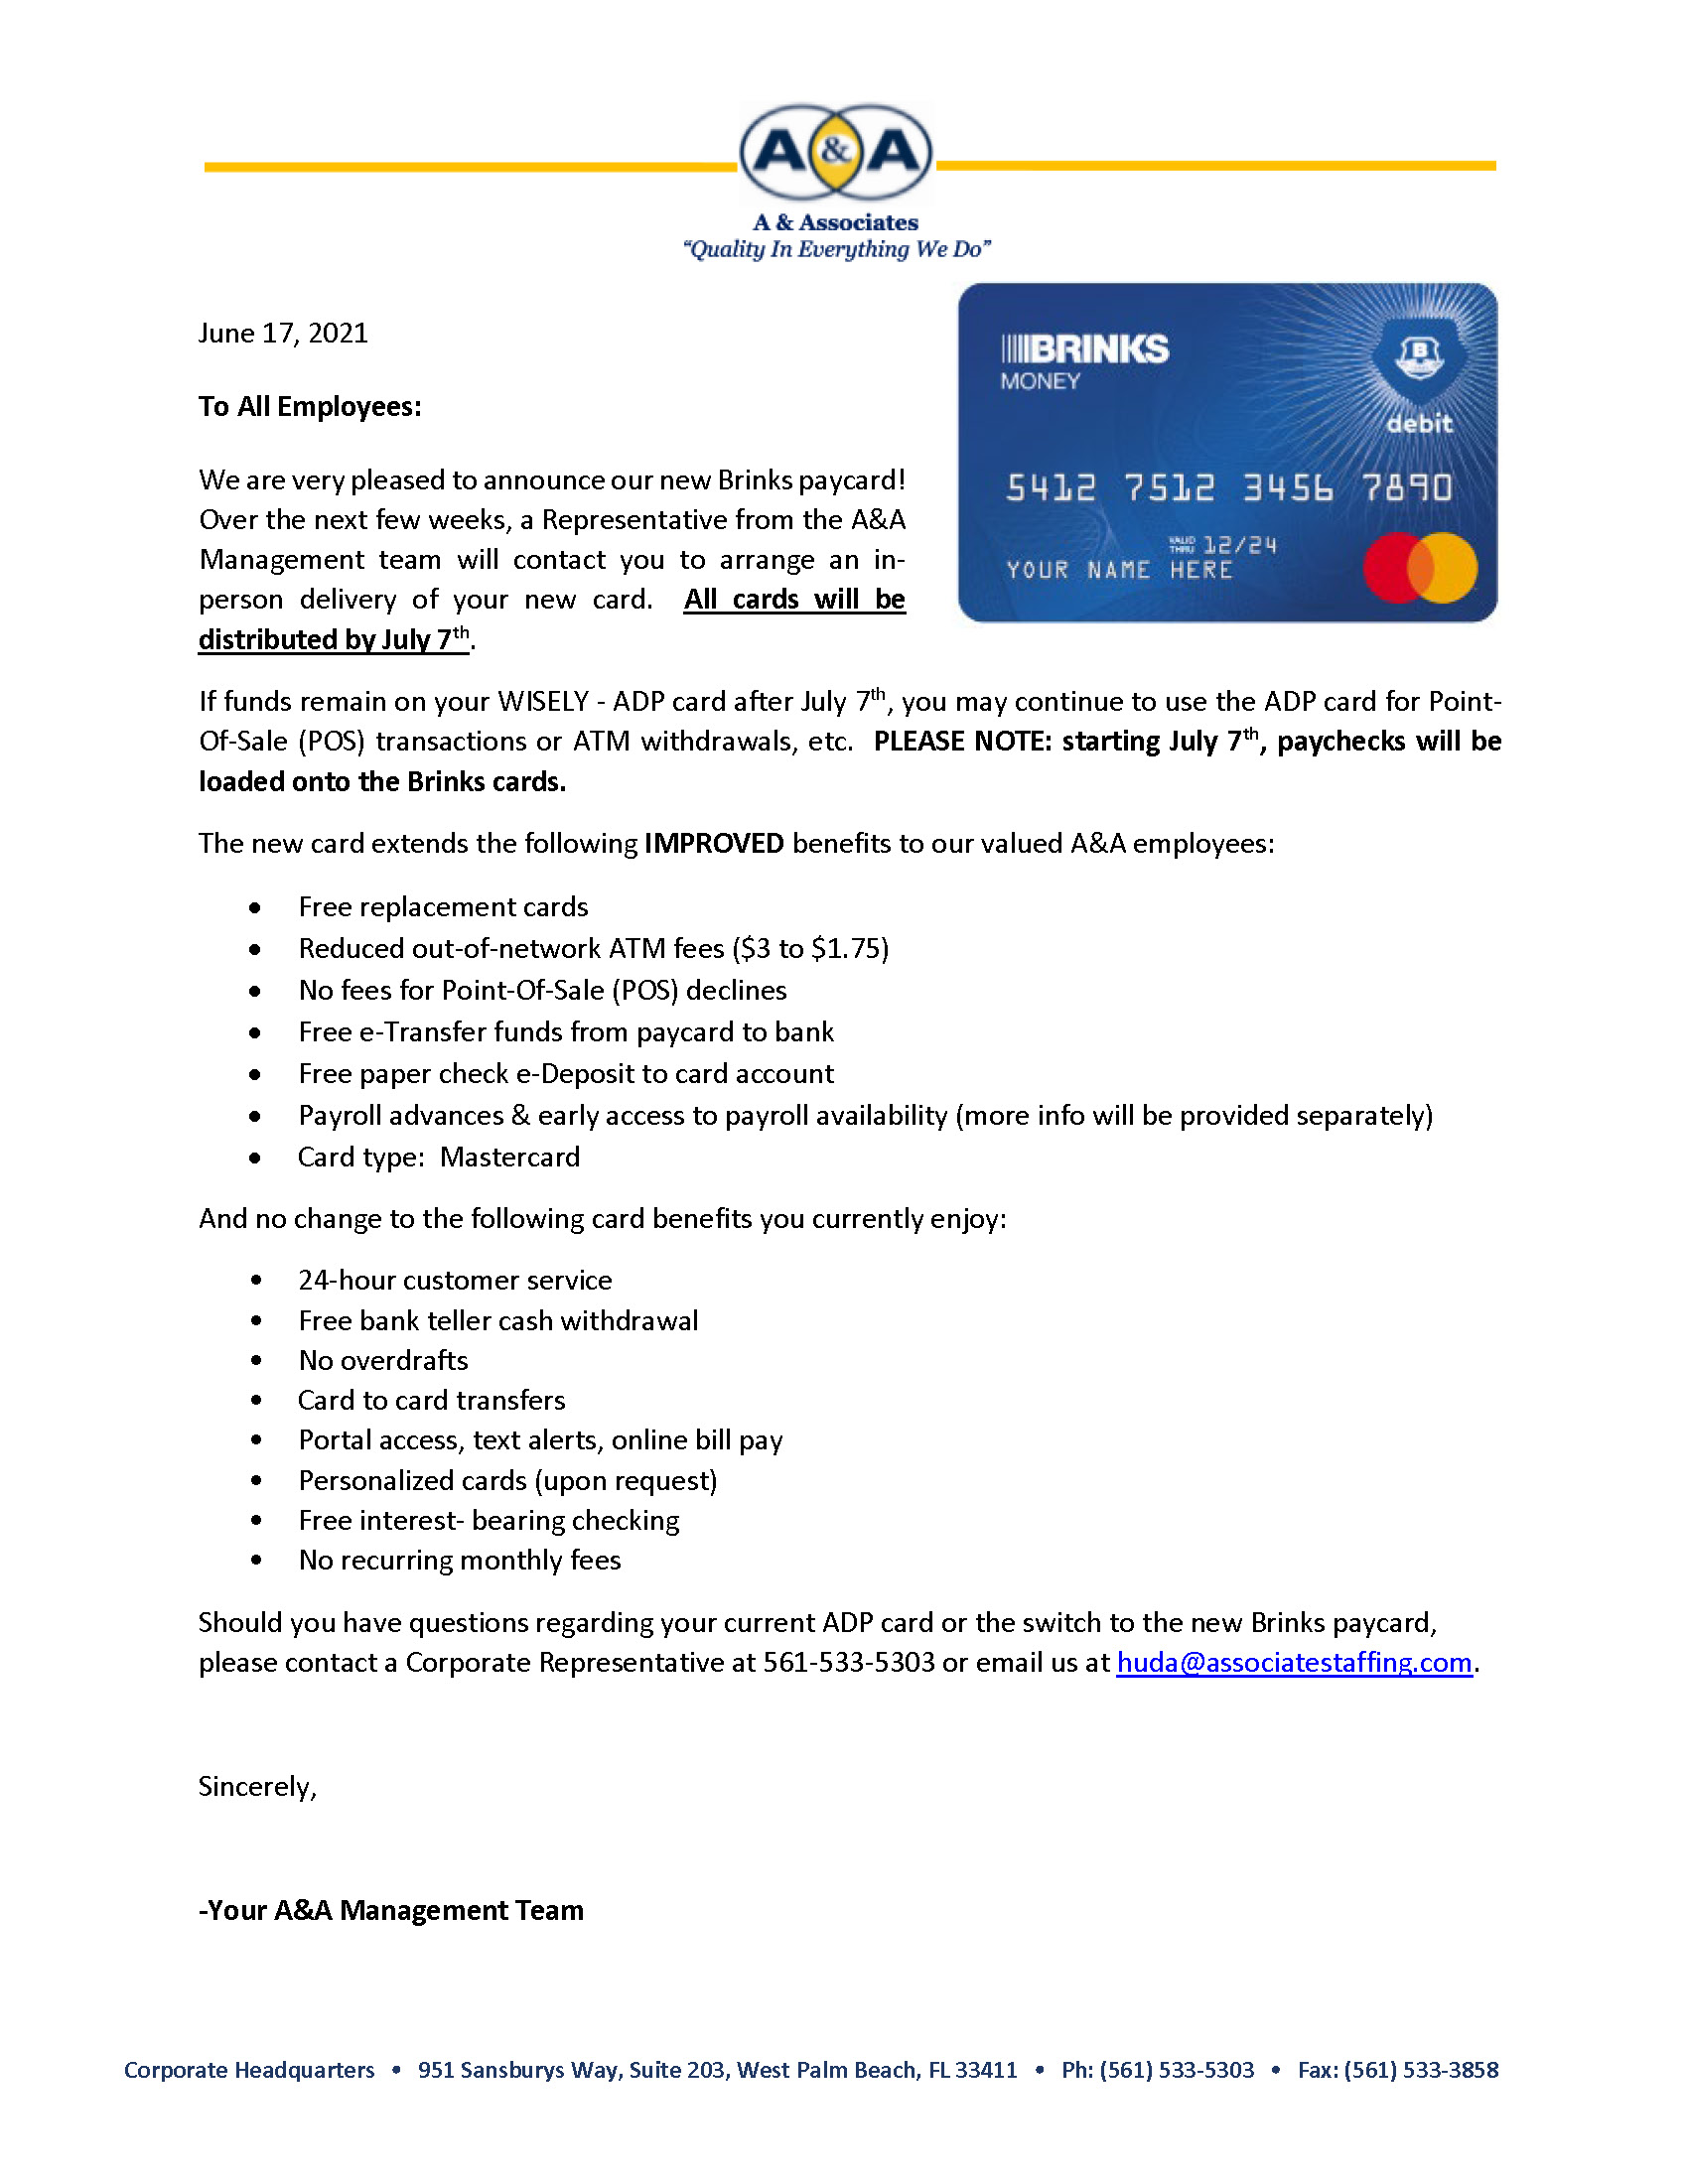 Brinks-Announcement-Letter-All-Employees-1